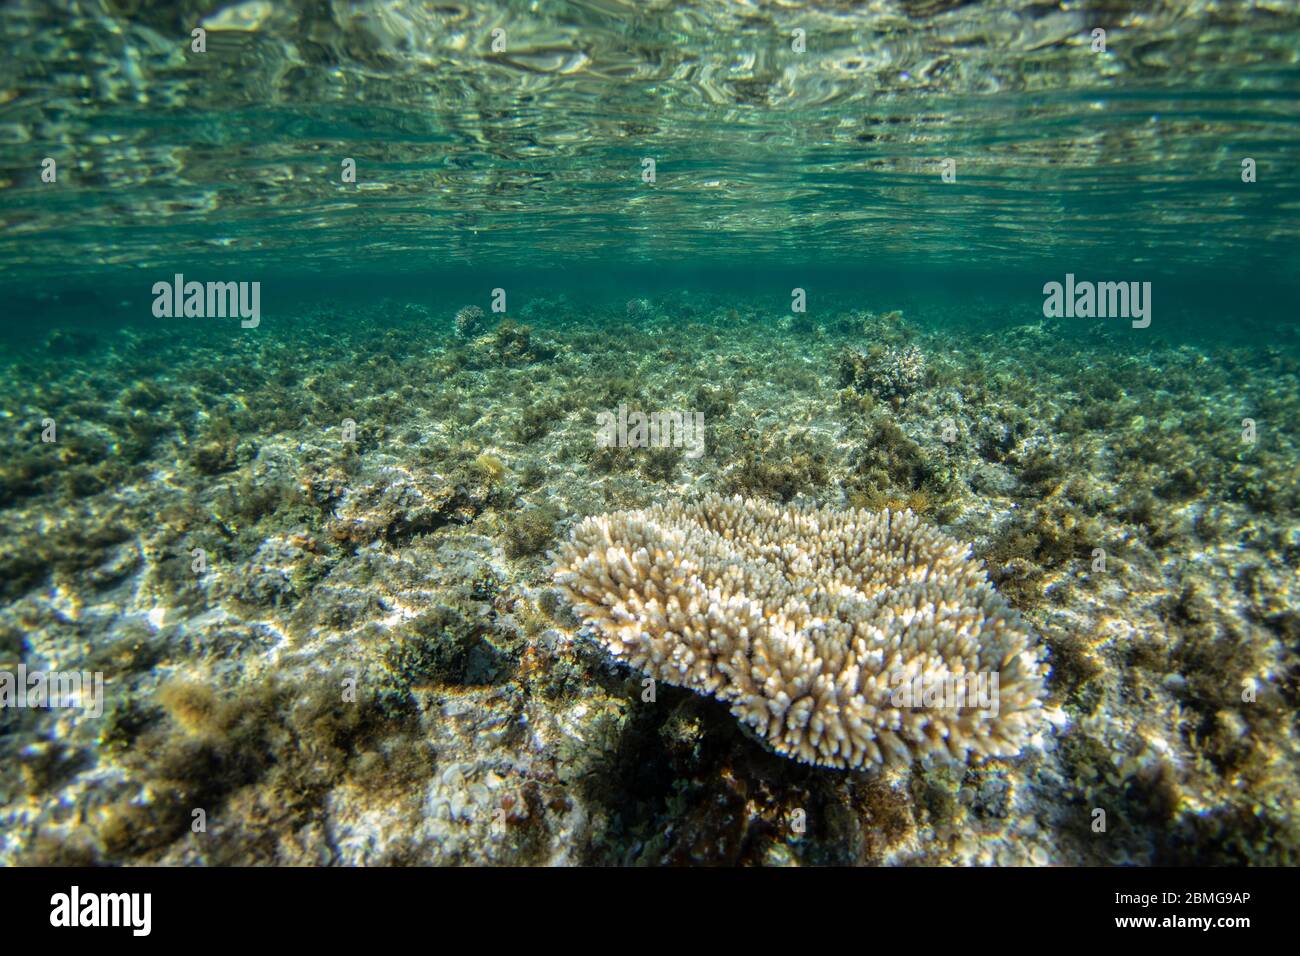 Coral reef formation in the blue water of the Red Sea Stock Photo